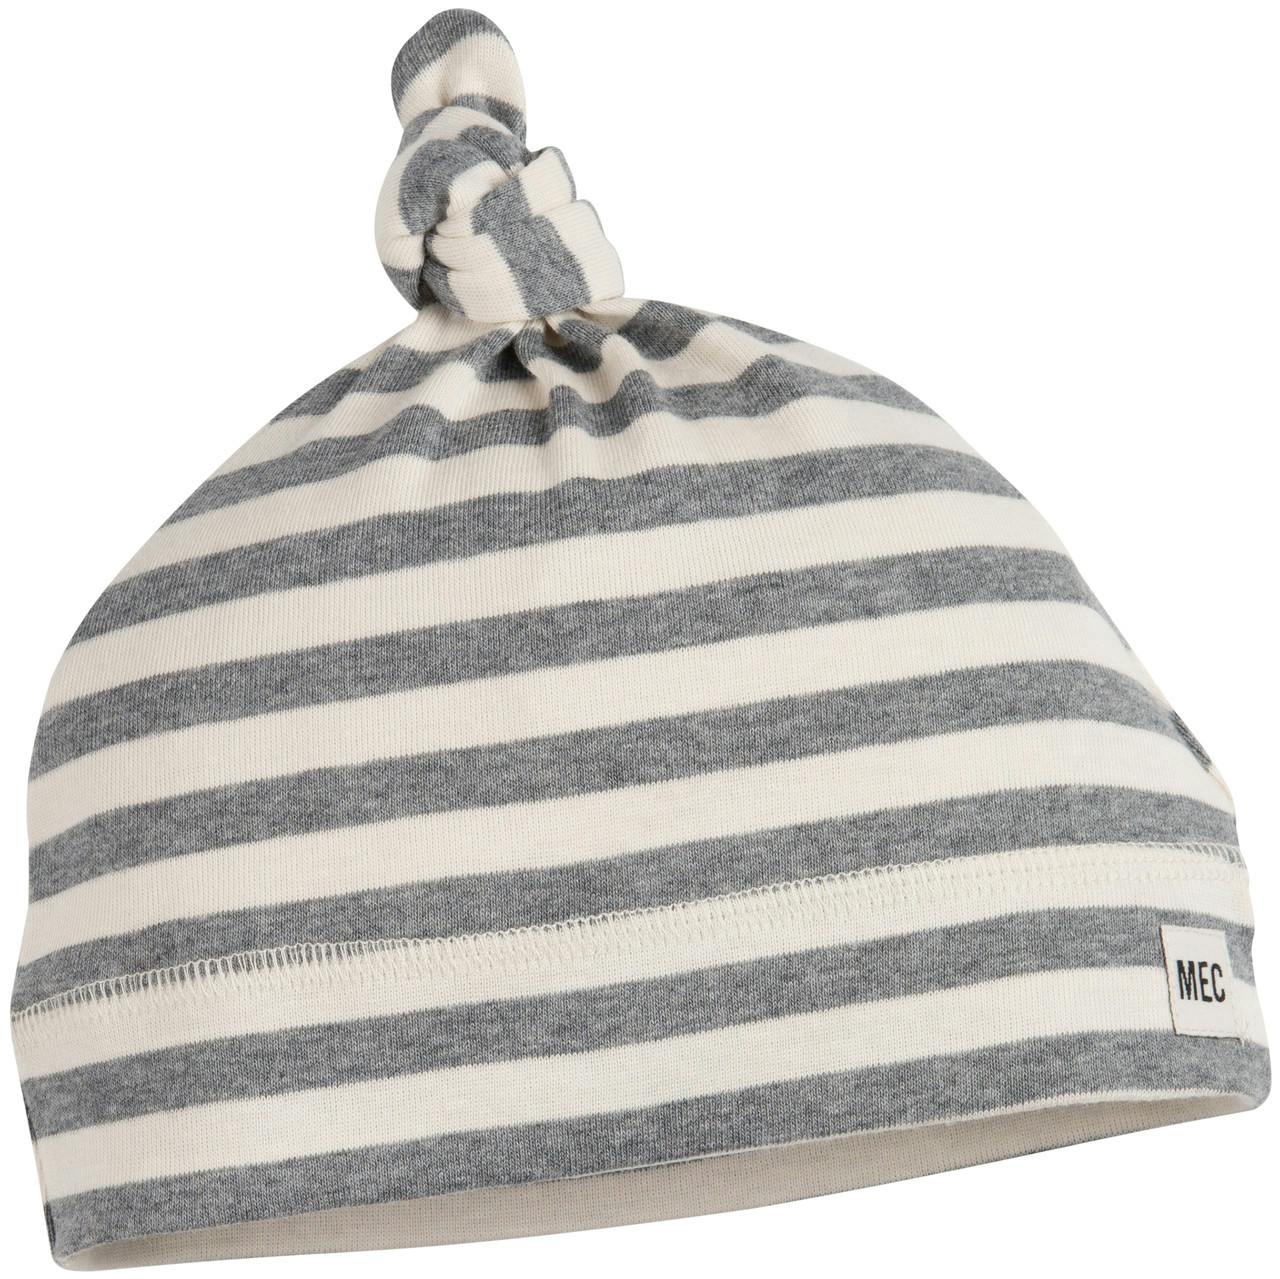 Tuque Knot Ray.rugby mn gris mous ch